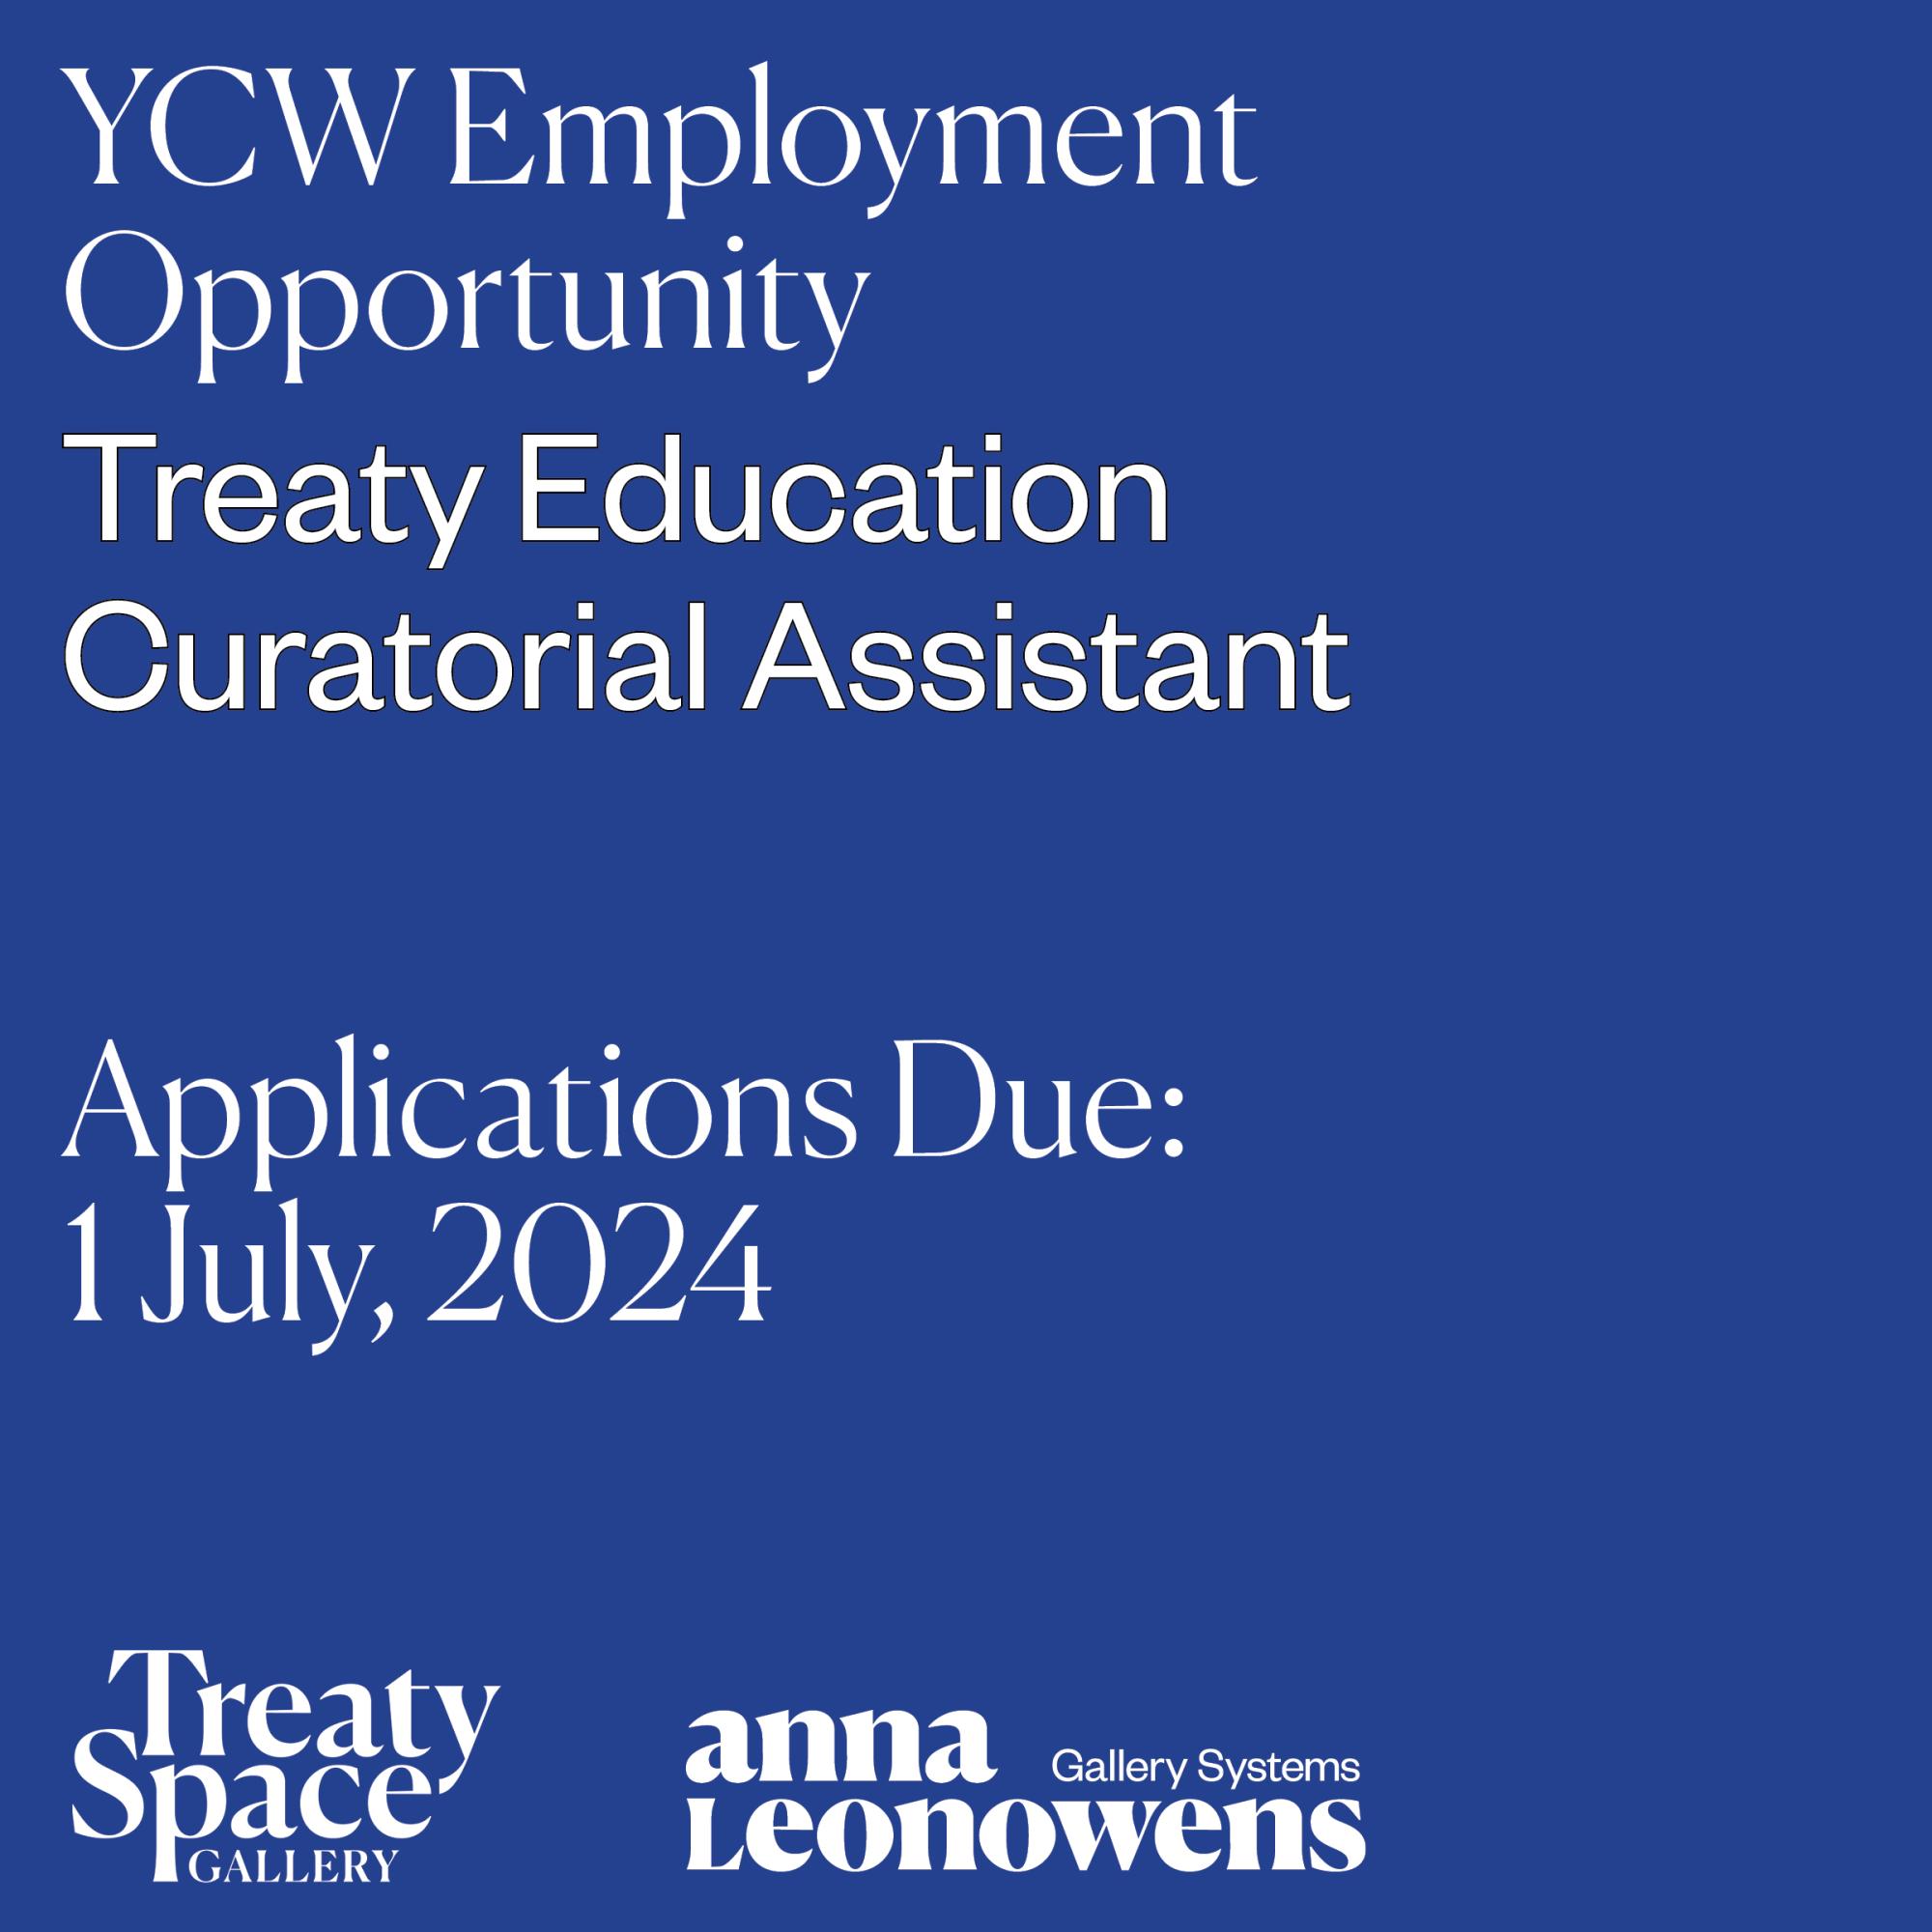 Dark blue background with white text reading 'YCW Employment Opportunity, Treaty Education Curatorial Assistant, Applications due 1 July 2024' with white Anna Leonowens Gallery Systems  and Treaty Space Gallery wordmark logos in lower left